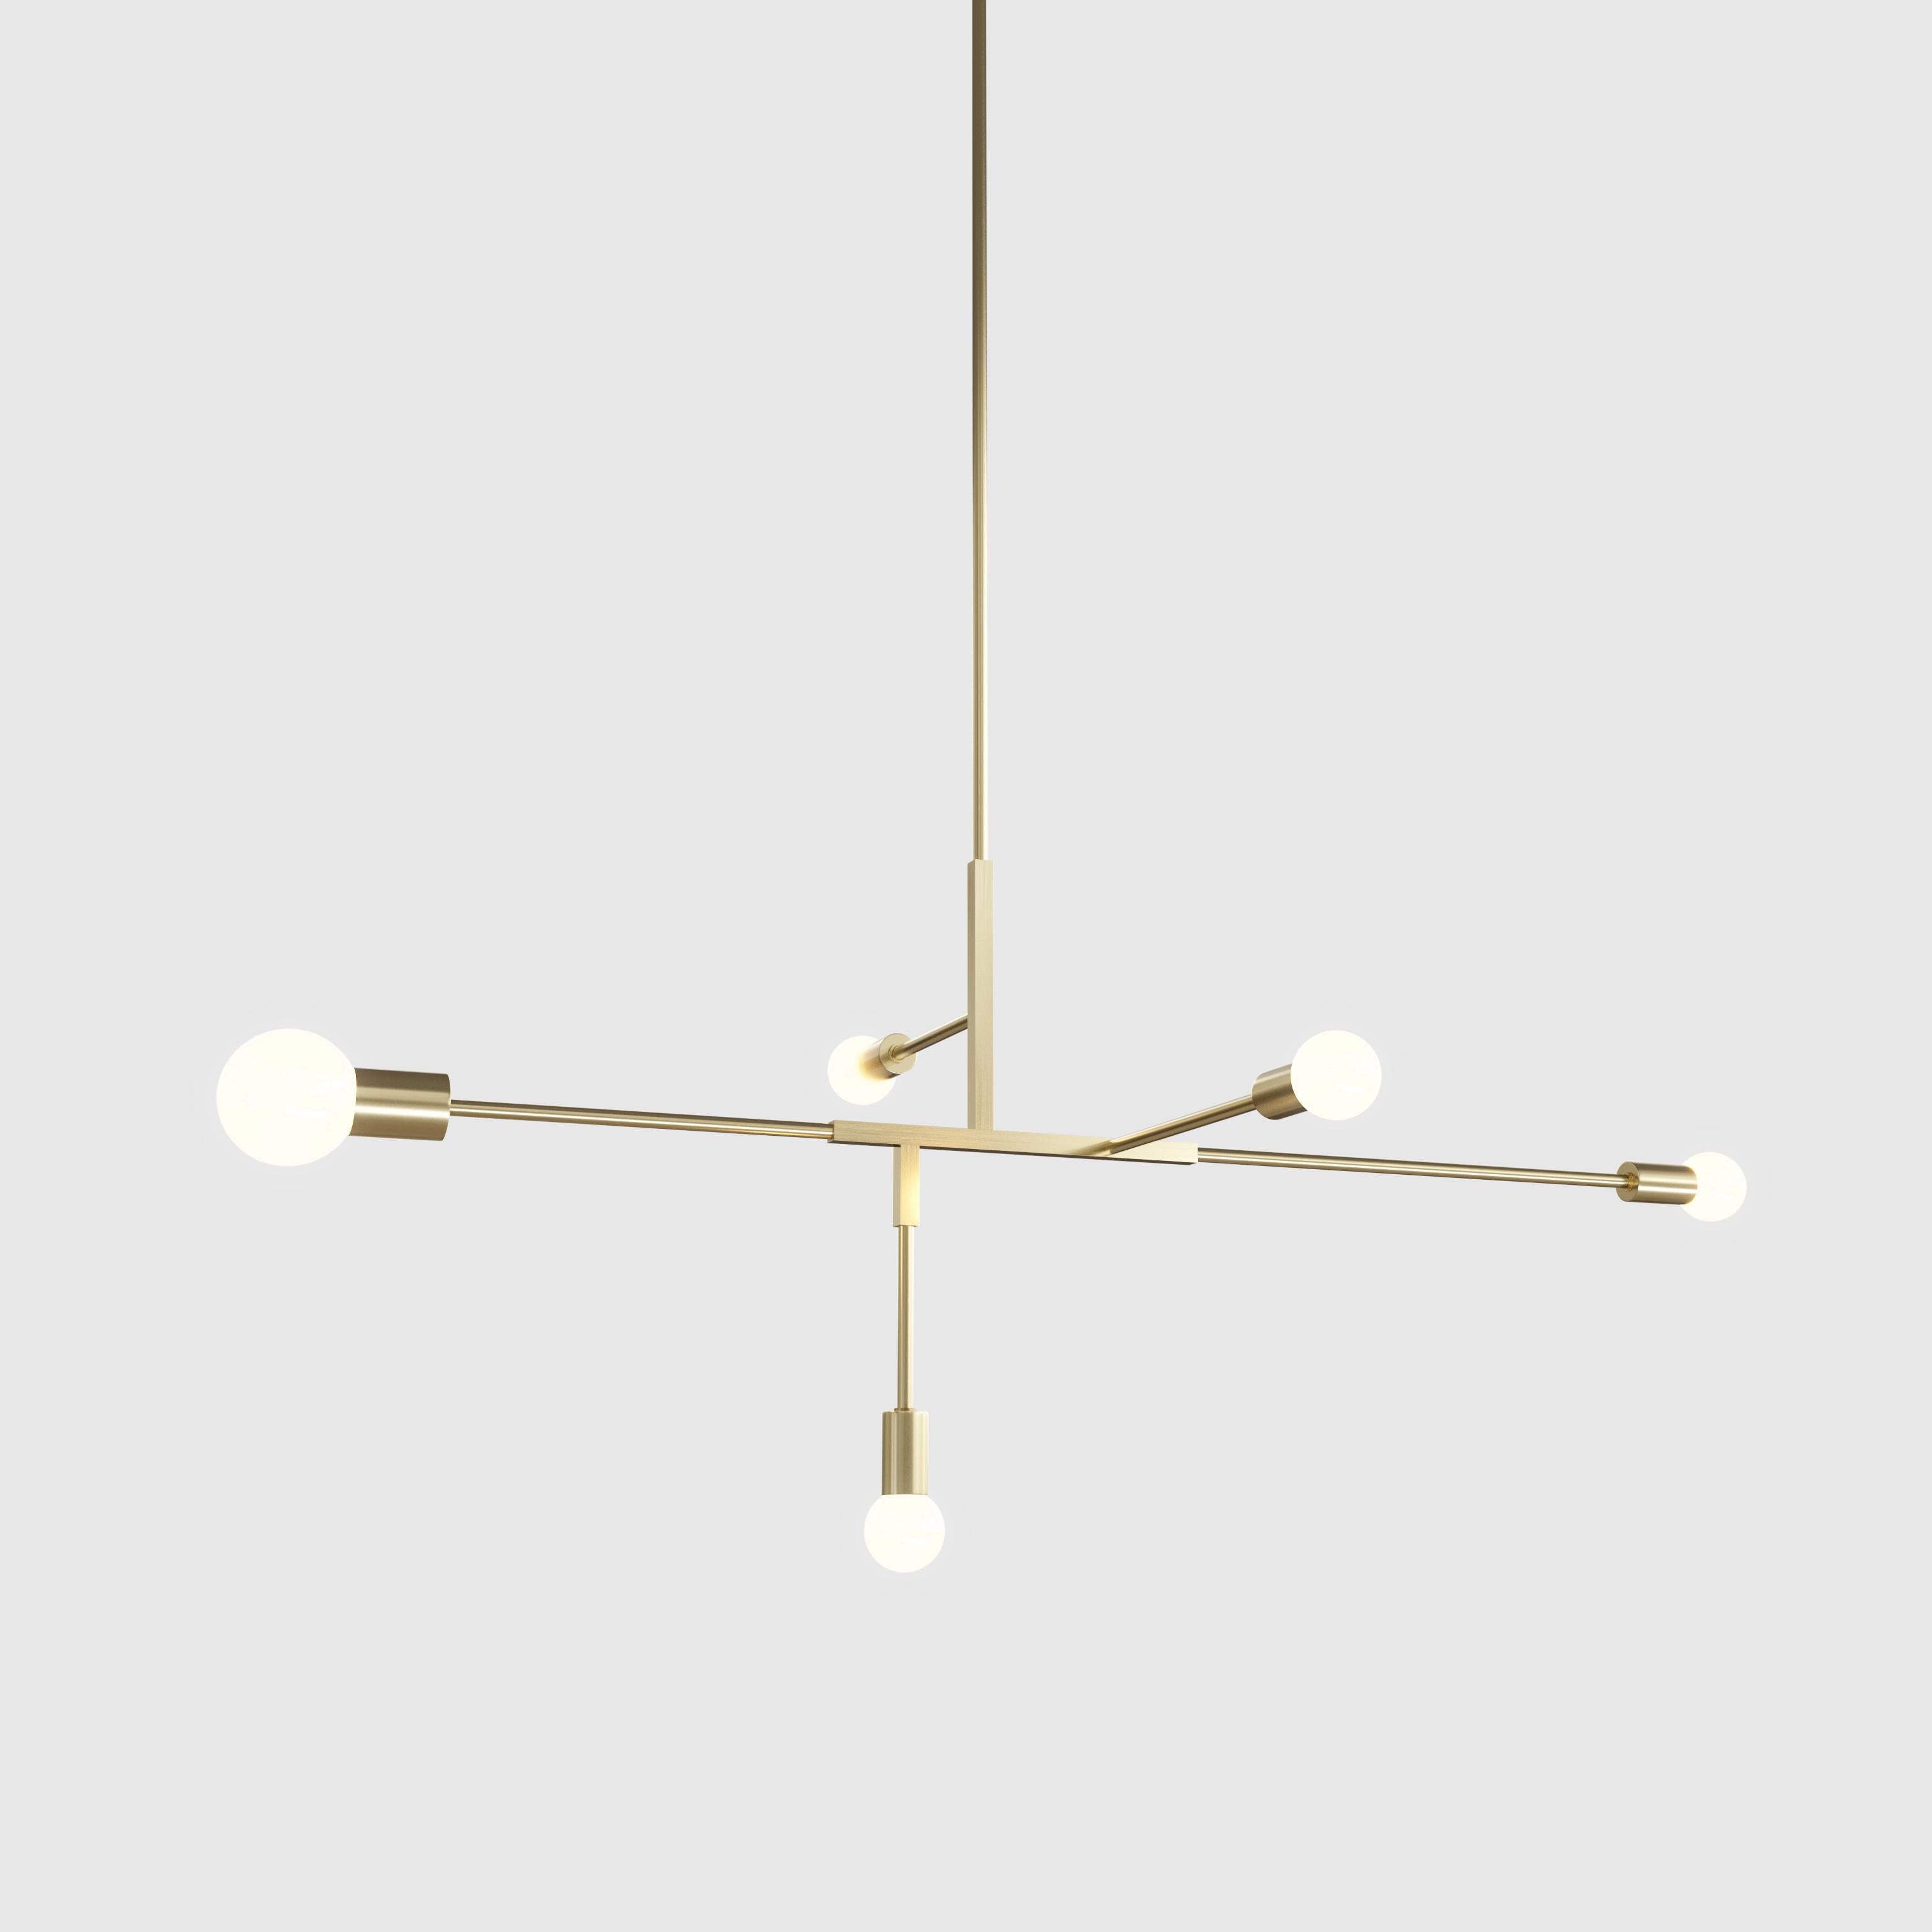 The Cliff Collection brings together the best of Lambert & fils Studio in its use of many signature elements. Natural brass and matte black rods provide structure for lamps with elegant shades and a range of spherical bulbs. The finishing and